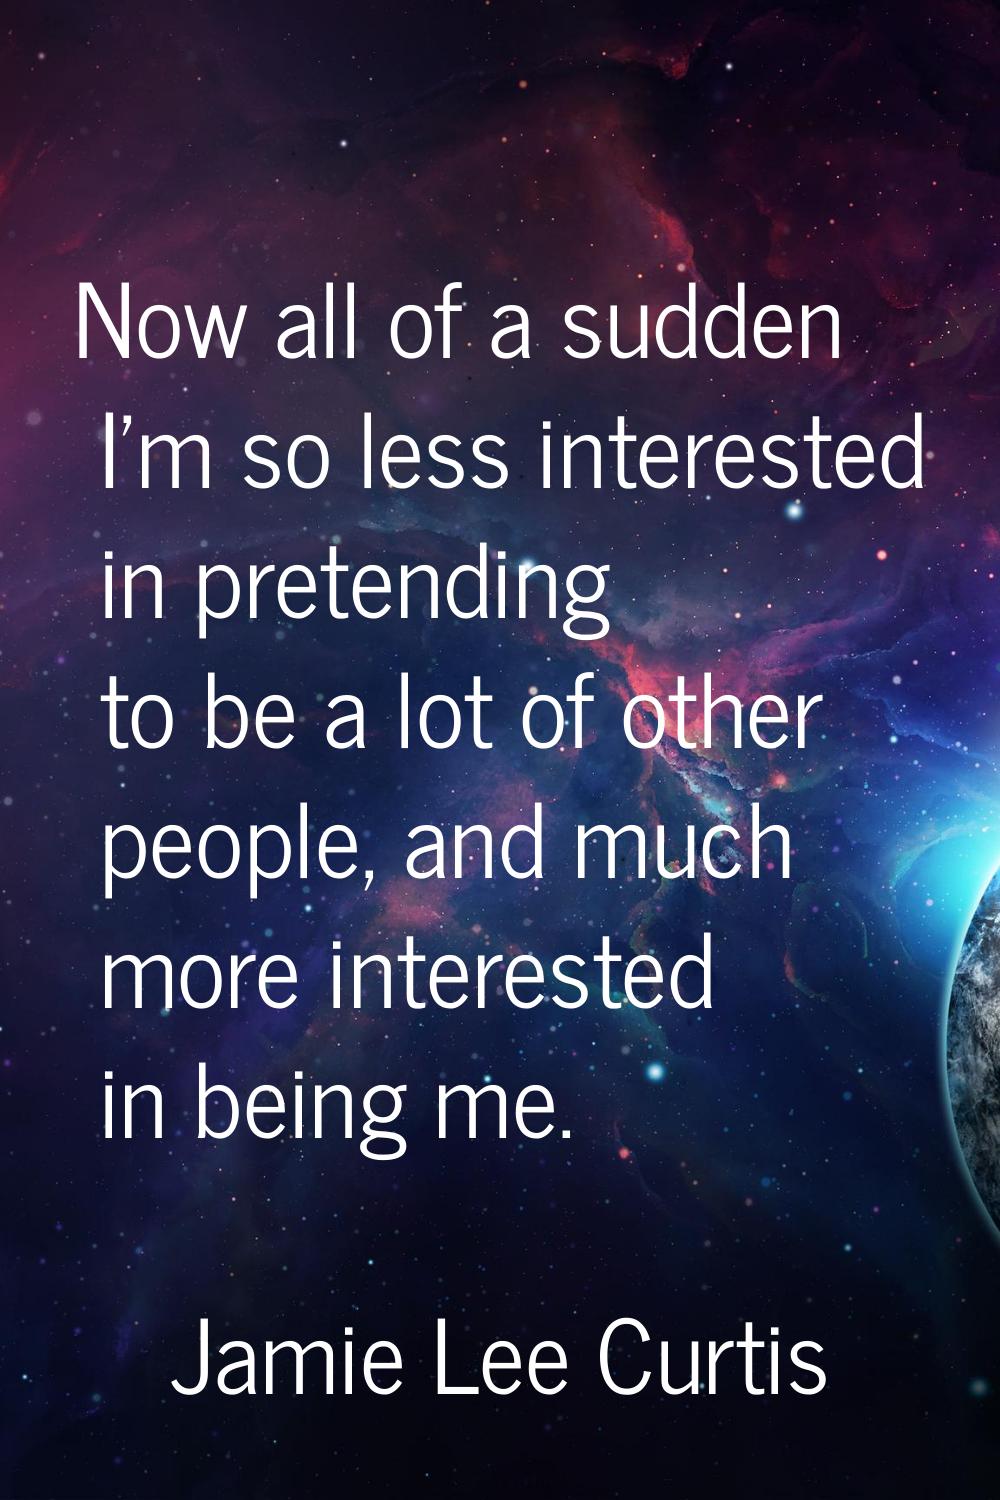 Now all of a sudden I'm so less interested in pretending to be a lot of other people, and much more